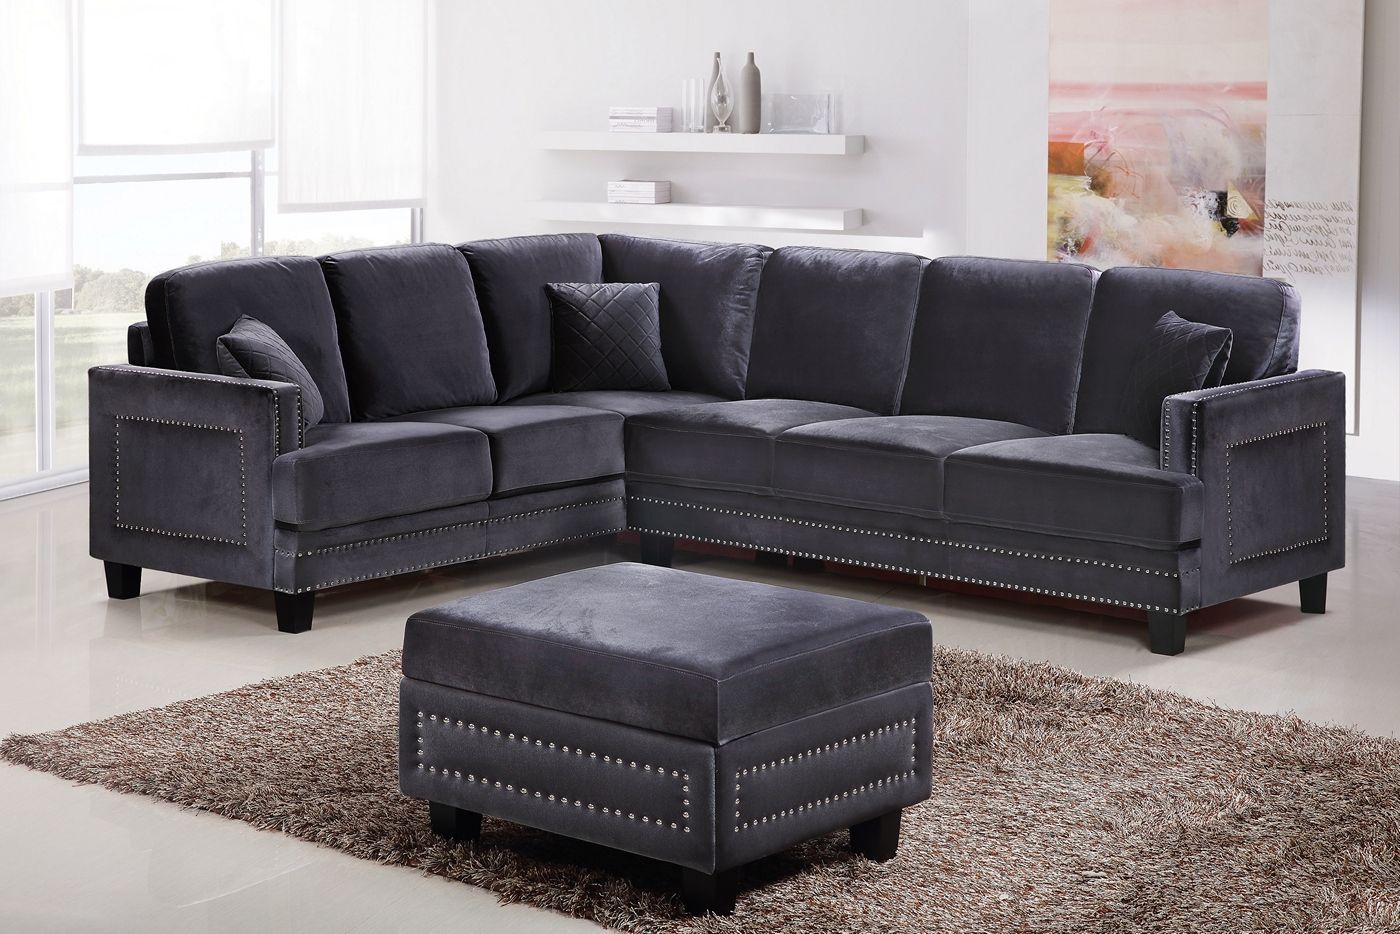 Braylee Modern Grey Velvet Sectional Sofa With Nailhead Trim Within Molnar Upholstered Sectional Sofas Blue/Gray (View 11 of 15)